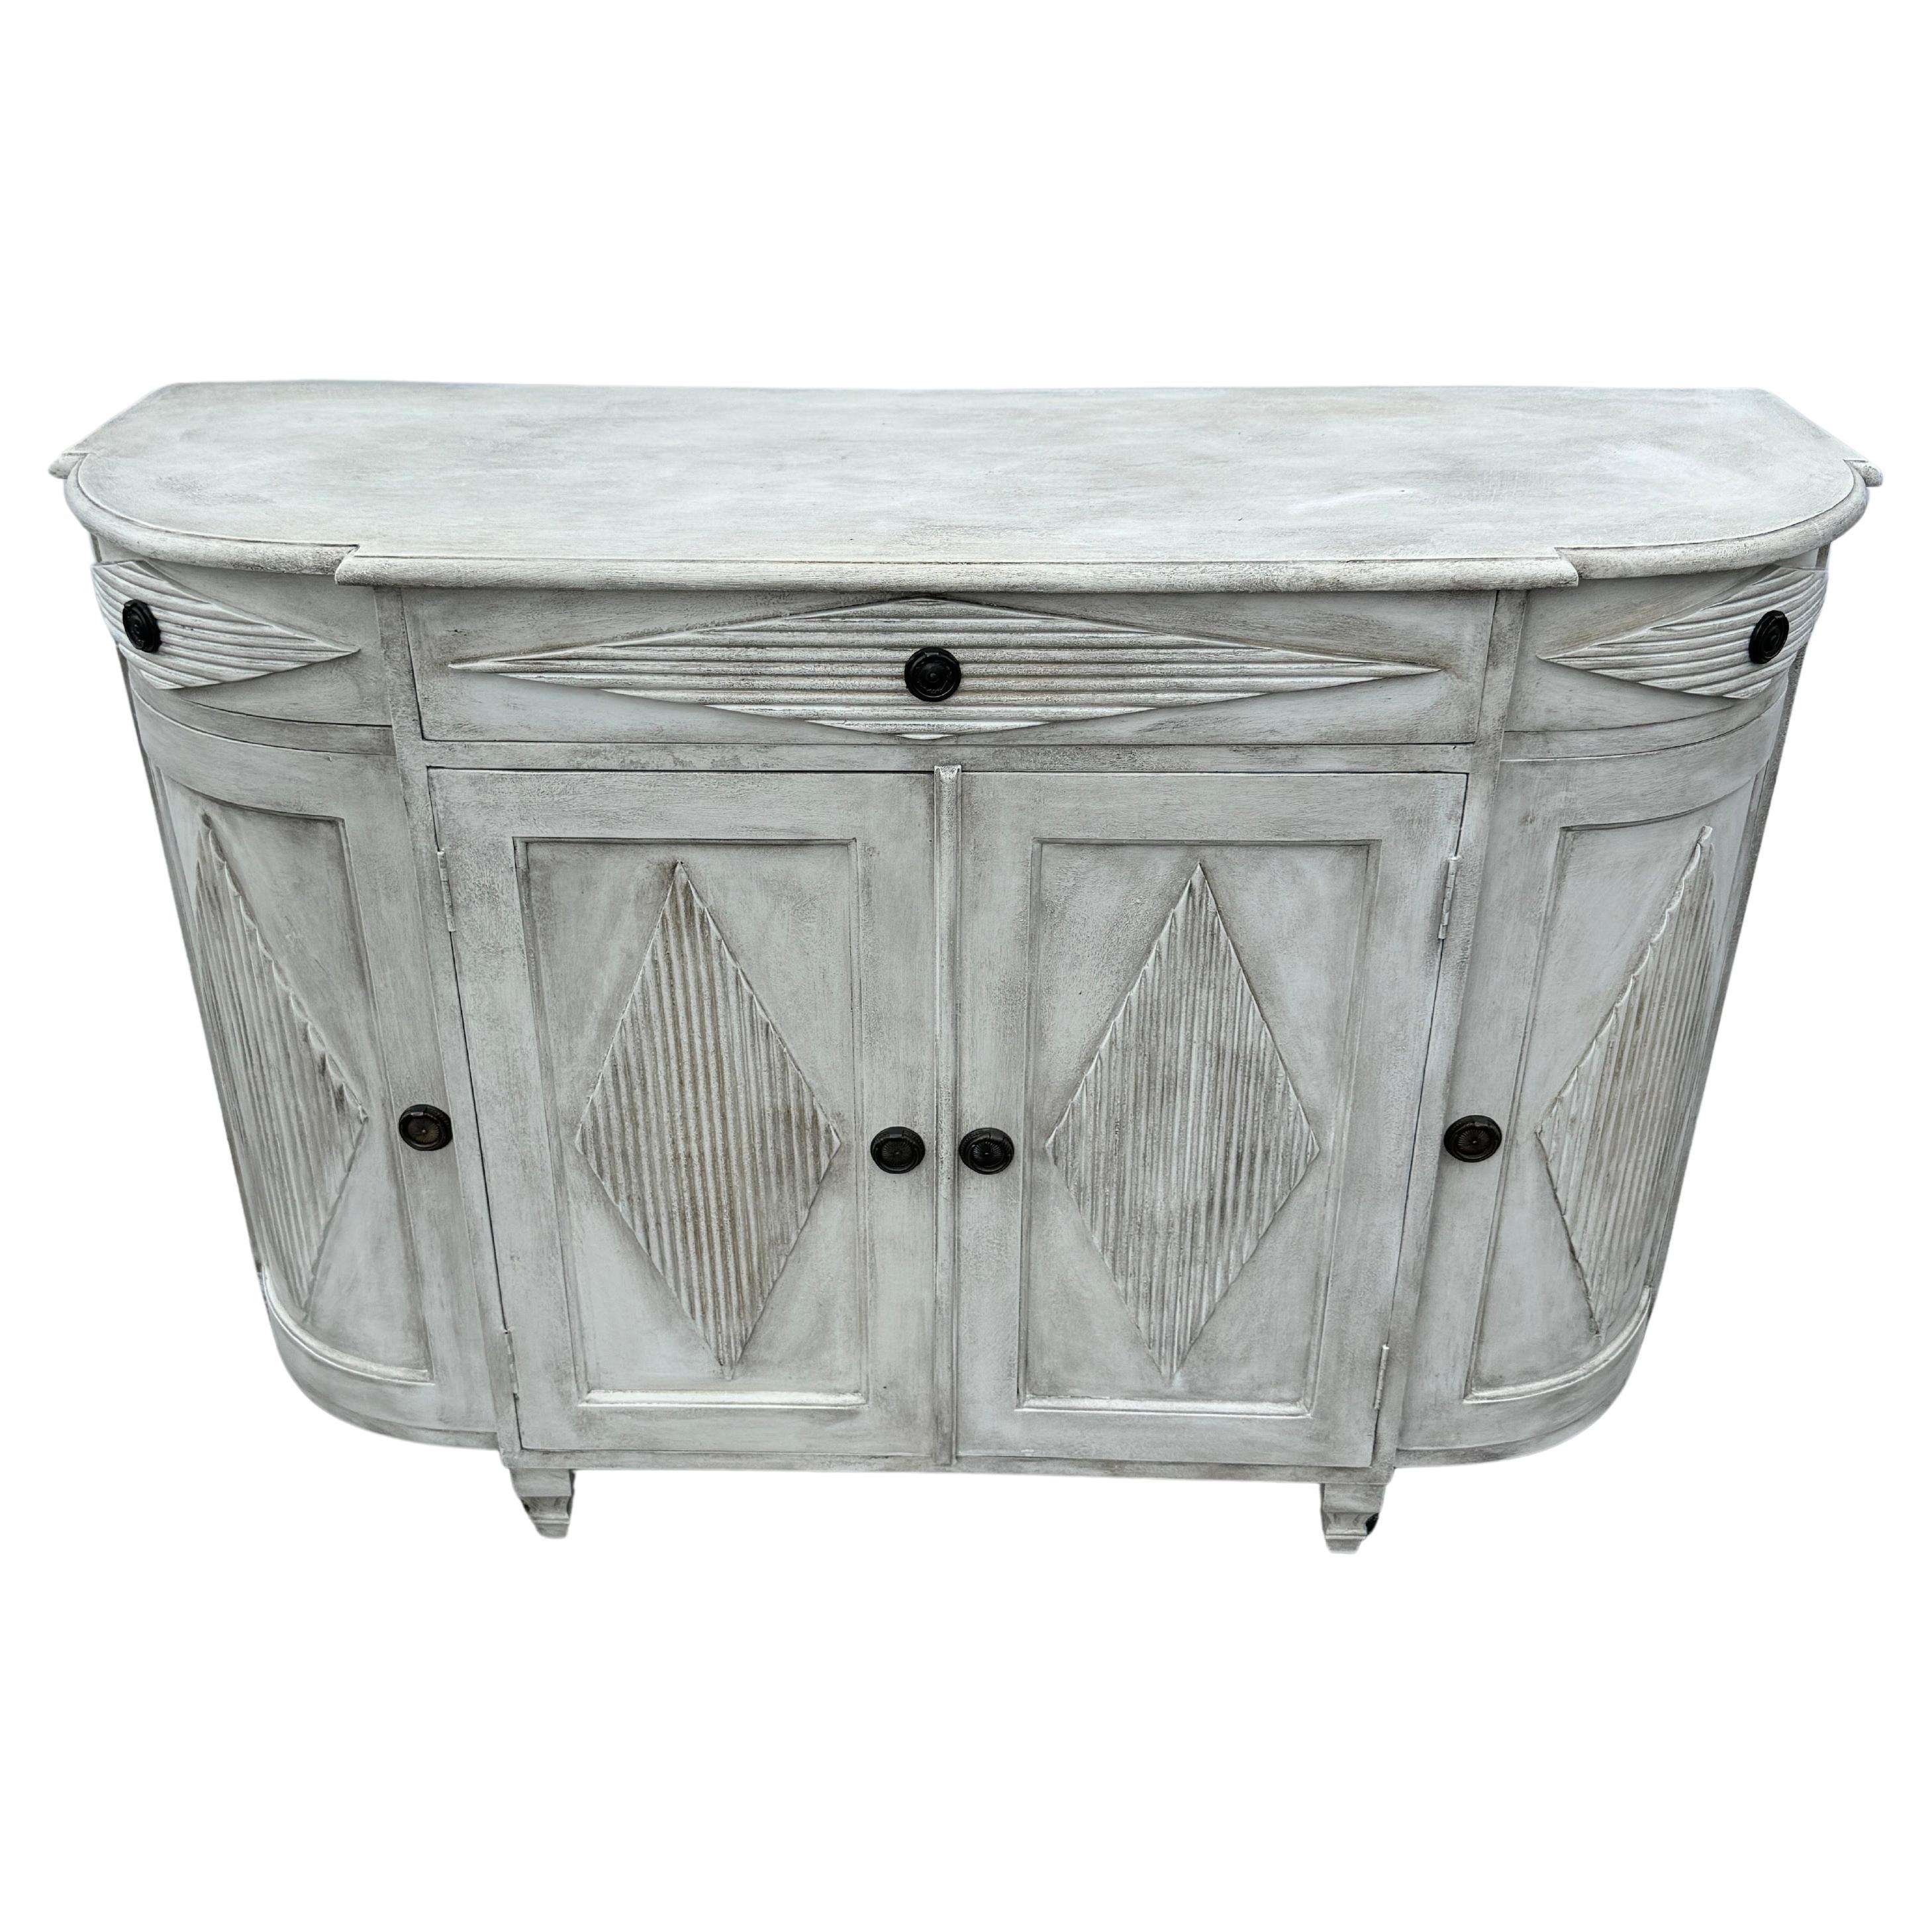 White Painted Gustavian 3 Drawer Painted Commode Cabinet with Doors

Hand painted Gustavian style sideboard constructed from solid wood with a hand-applied distressed finish with brass ring hardware. This classic Swedish style commode with